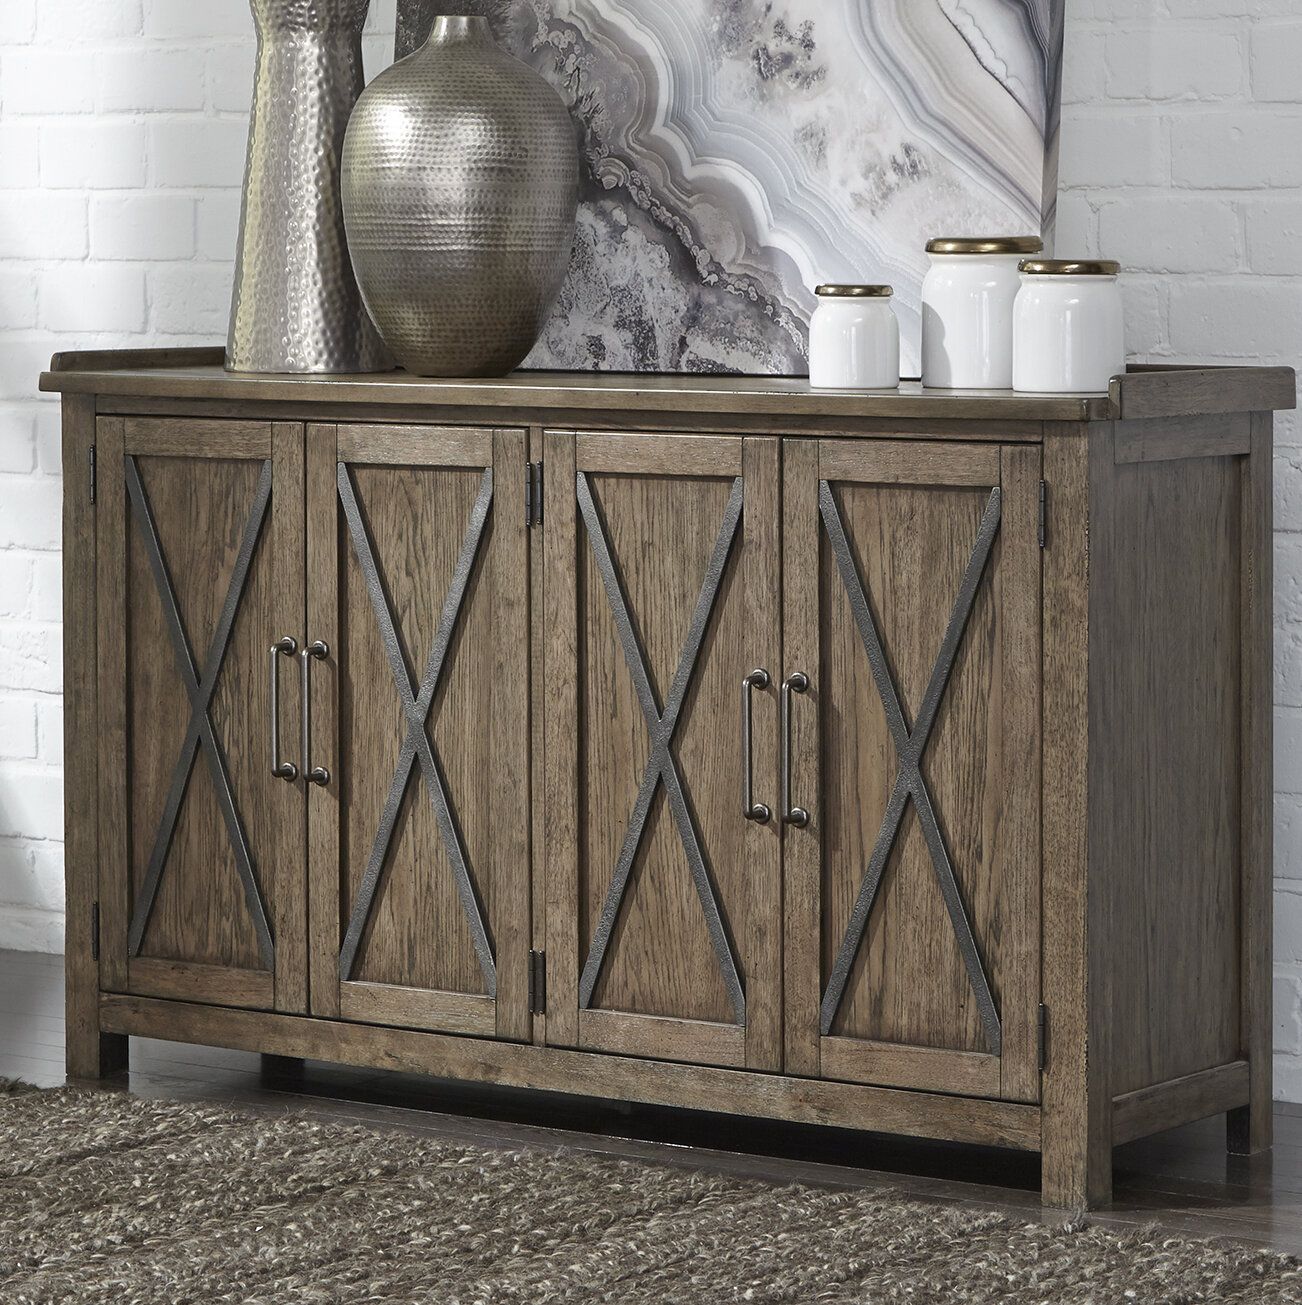 Farmhouse & Rustic Gracie Oaks Sideboards & Buffets | Birch Lane With Regard To Hayter Sideboards (Photo 28 of 30)